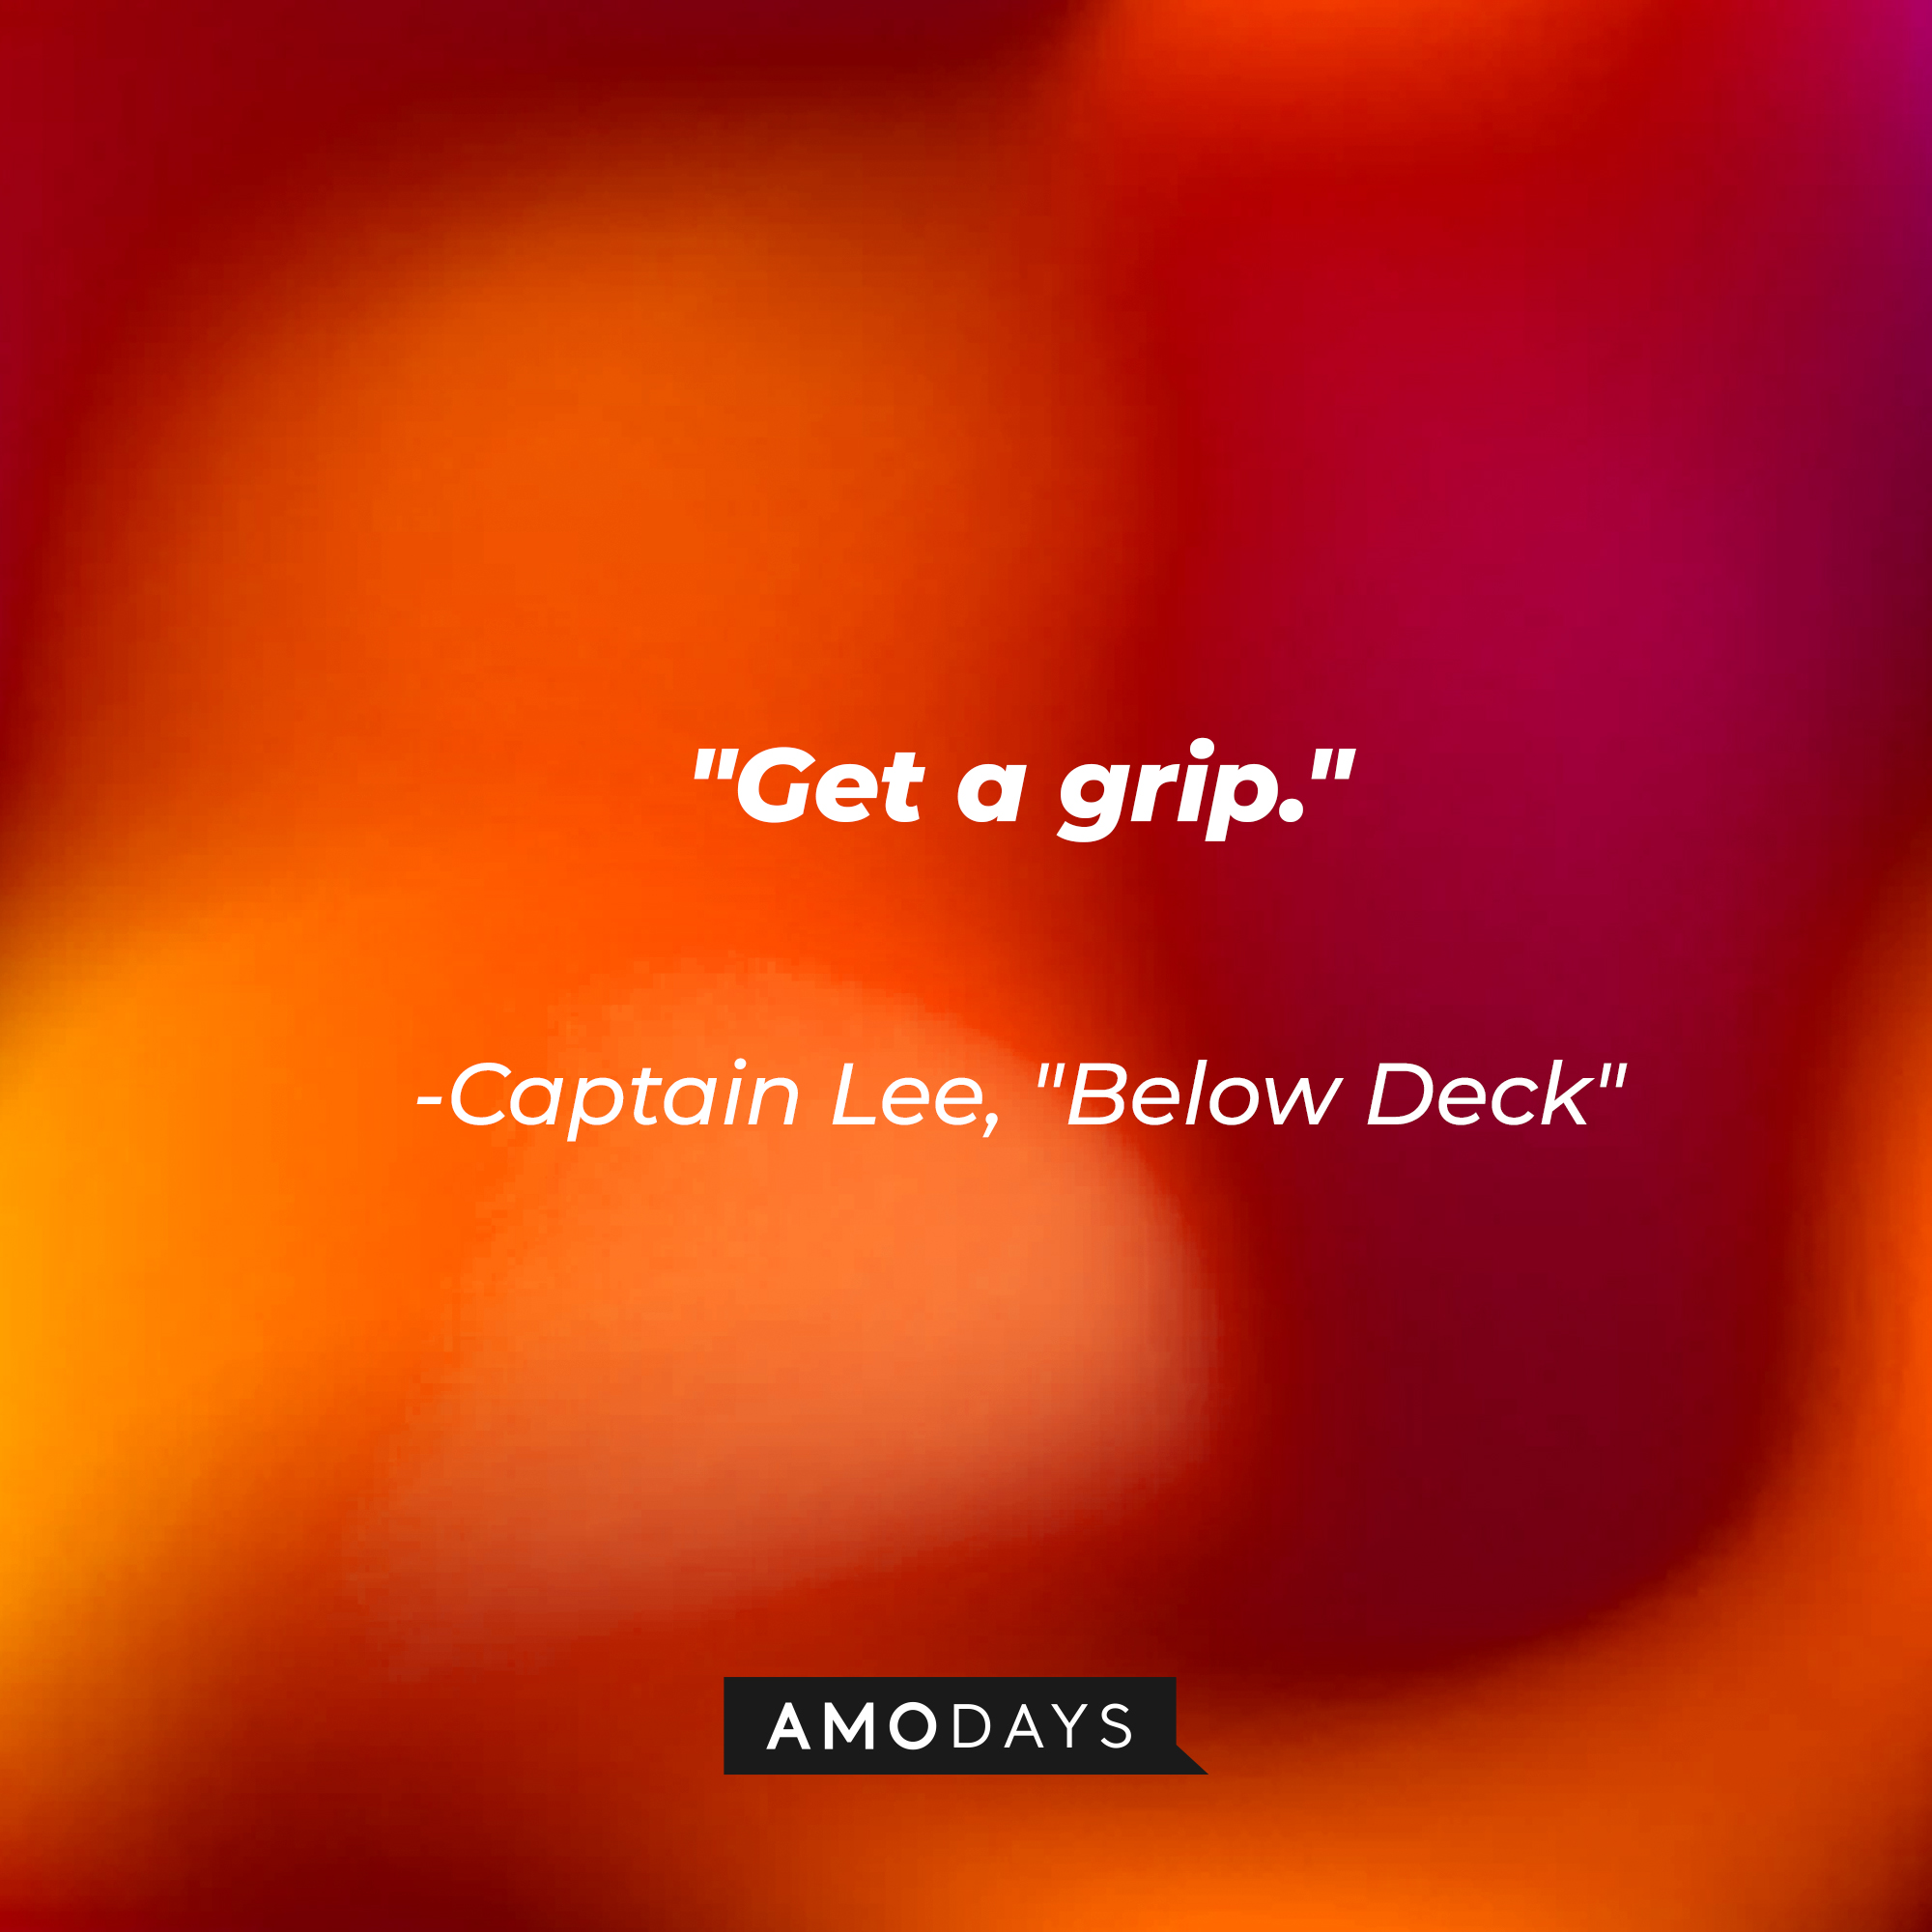 Captain Lee's quote from "Below Deck:" "Get a grip." | Source: AmoDays